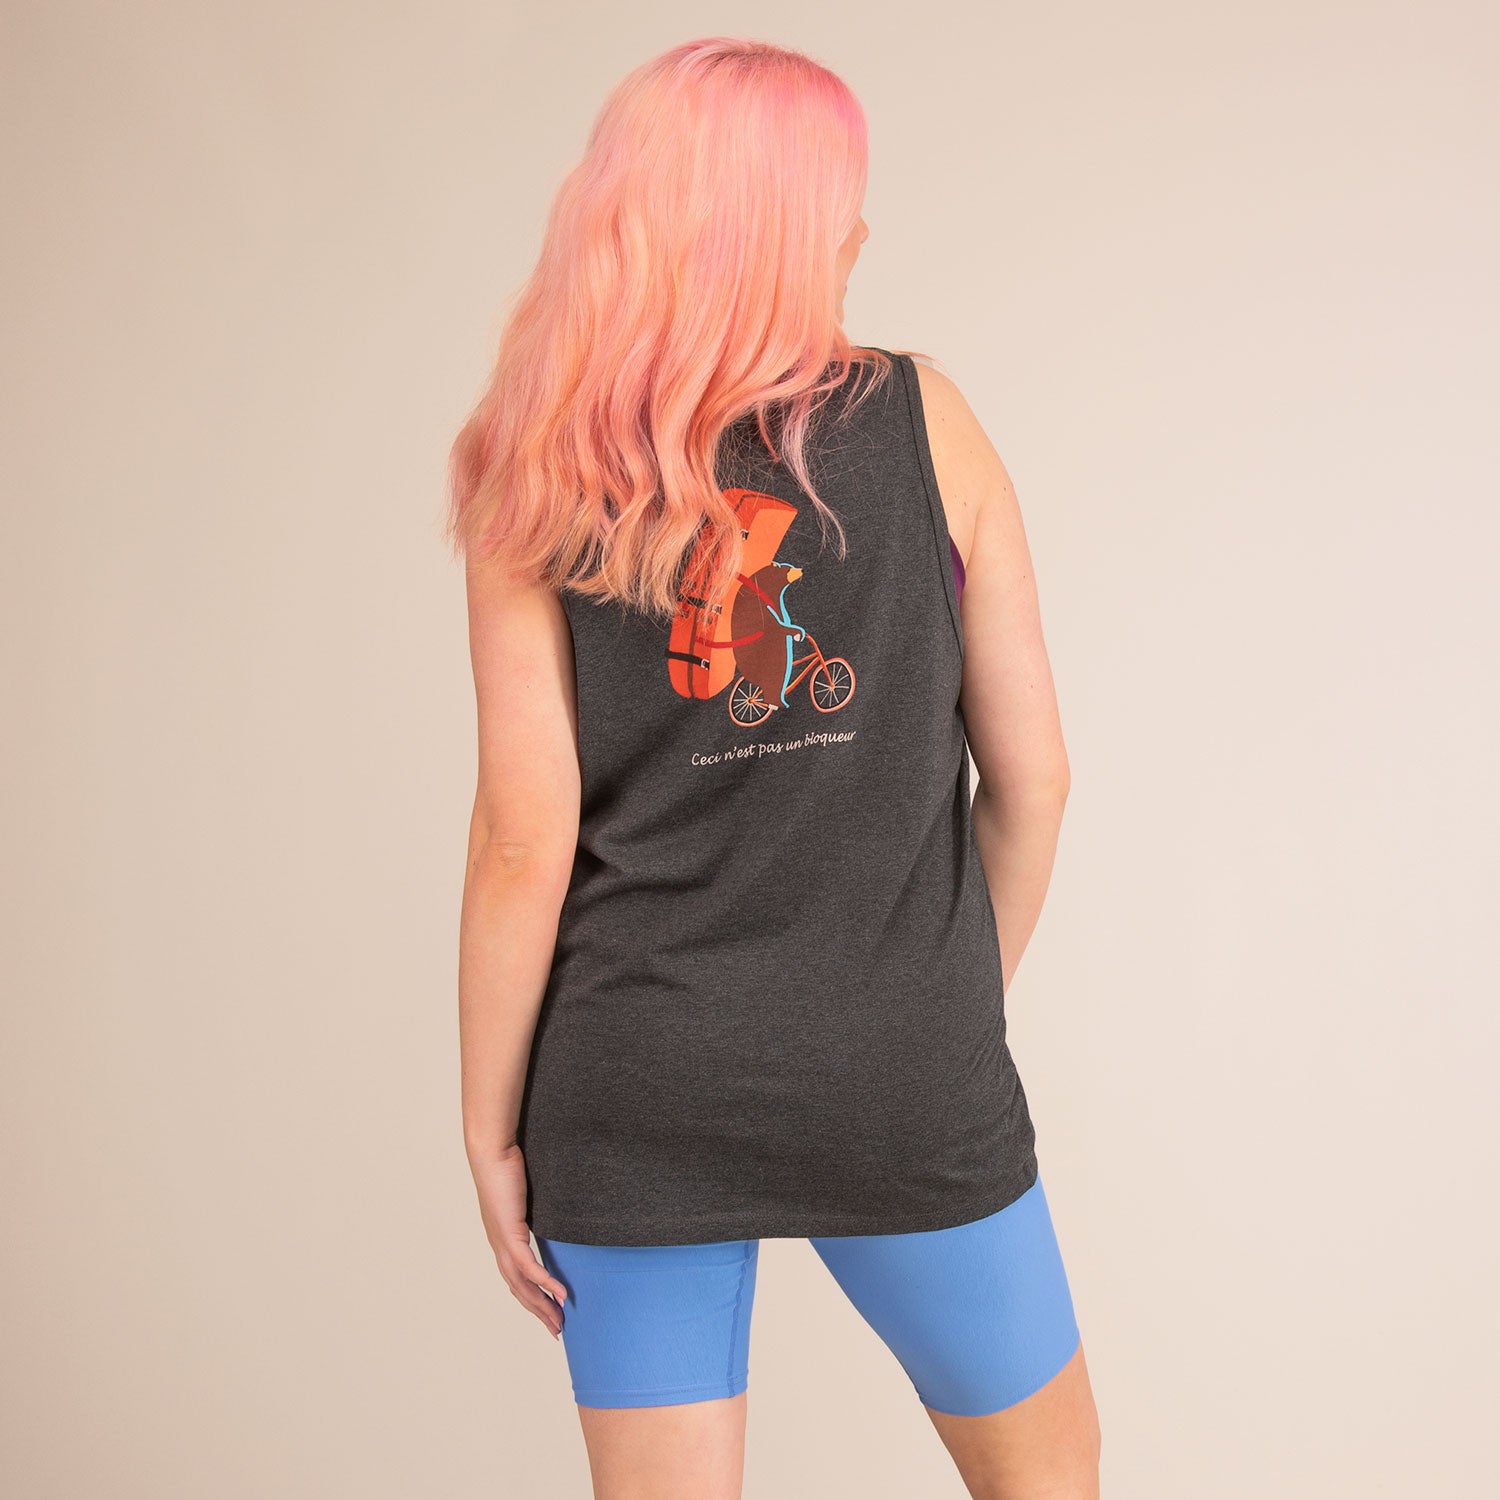 BLOQUEUR VEST | Organic Cotton Action Vest | 3RD ROCK Clothing -  Sophie is 5ft 9 with a 40.5" bust and wears a size L F